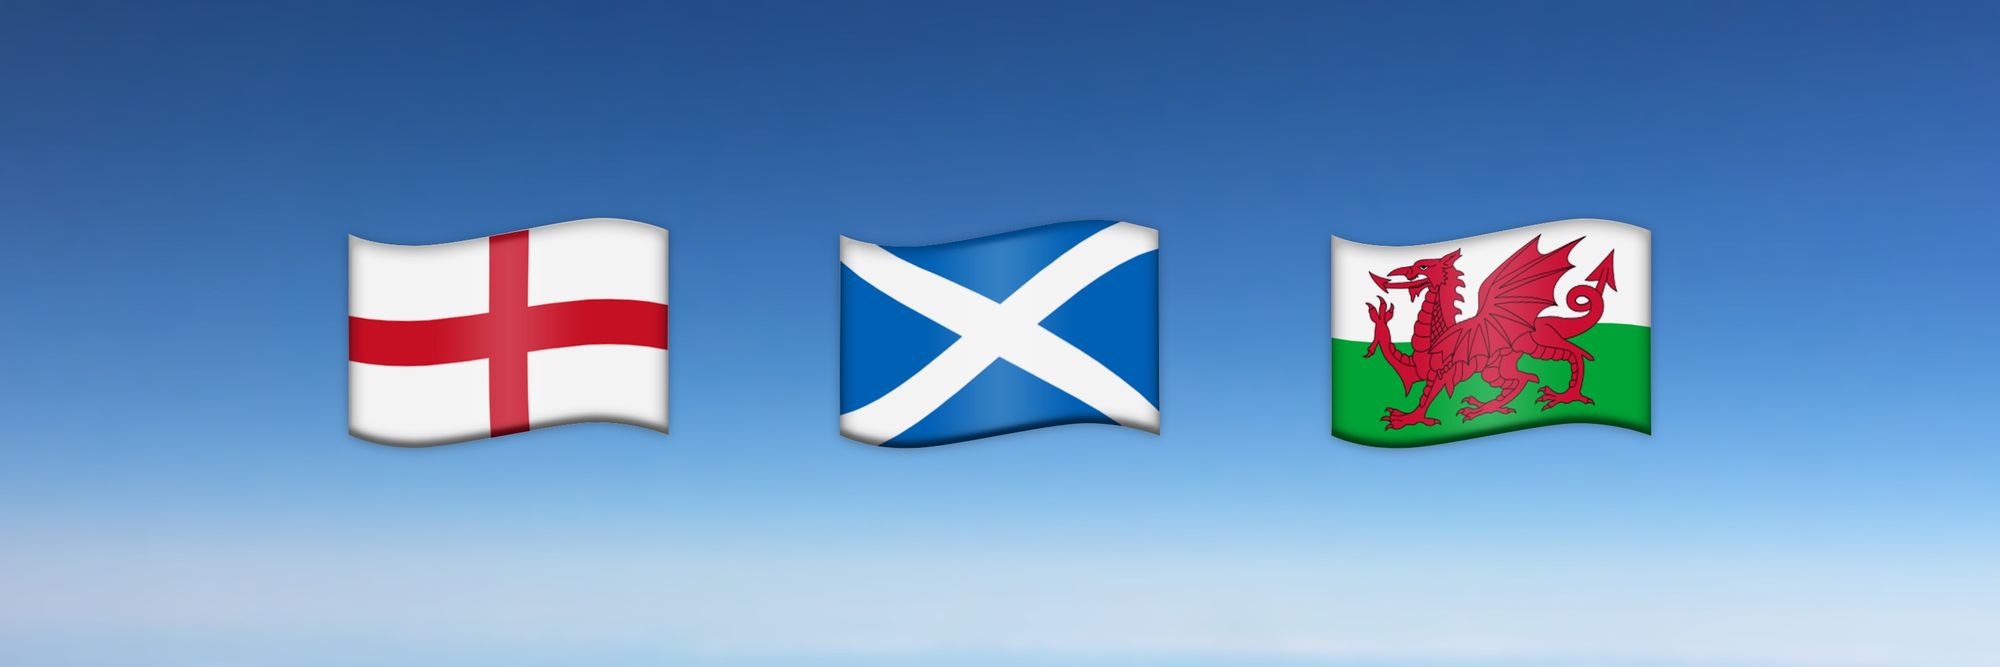 Emoji Flags for England, Scotland and Wales